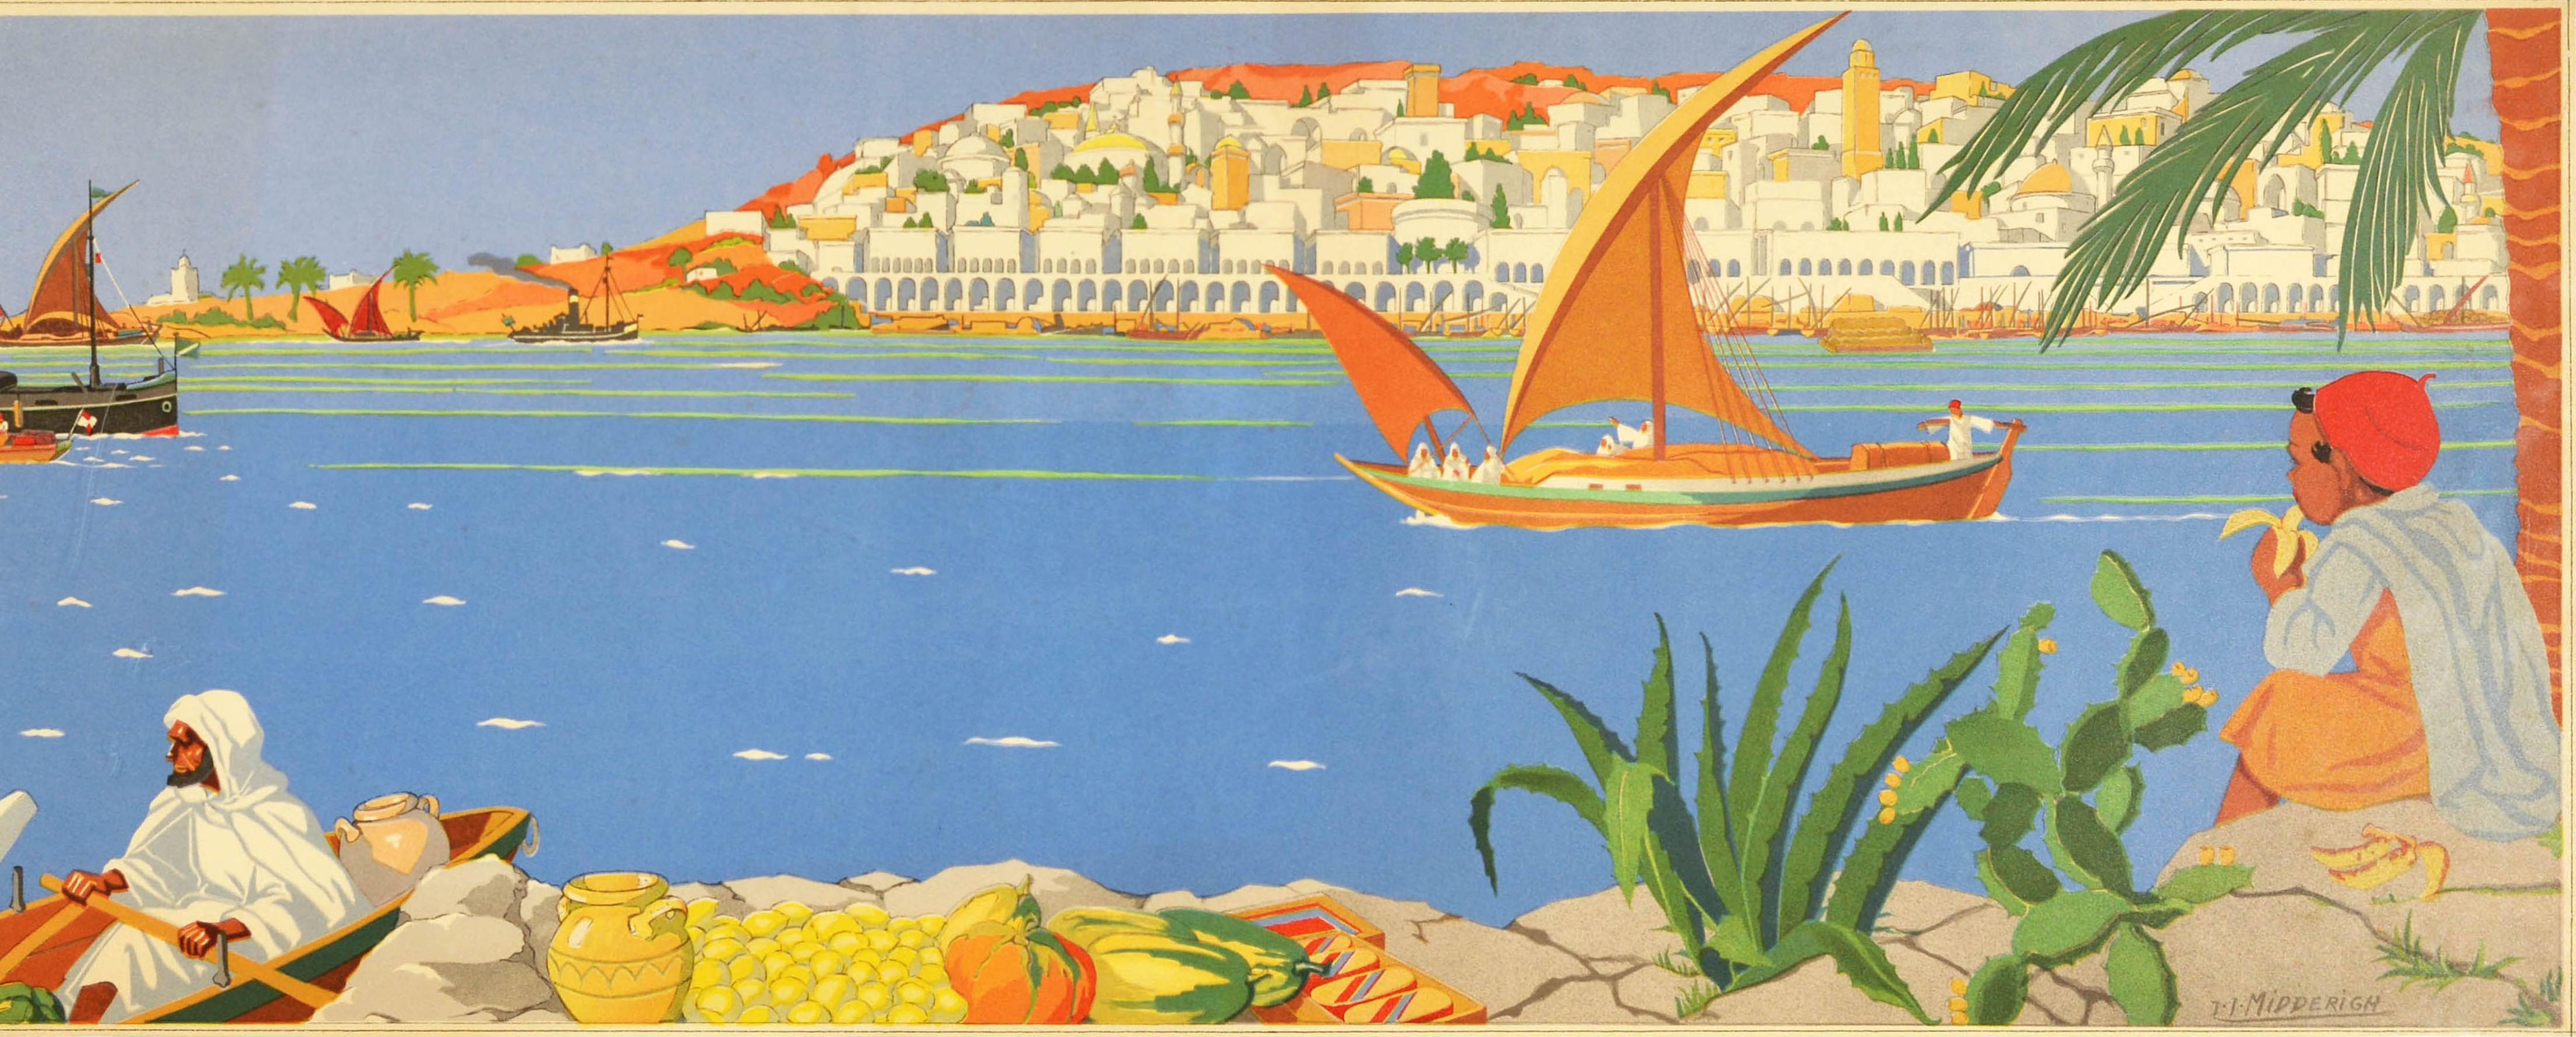 Original Vintage Poster In The Near East Cruise Ship Sailing Boats Travel Art - Print by Jean Jacques Midderigh